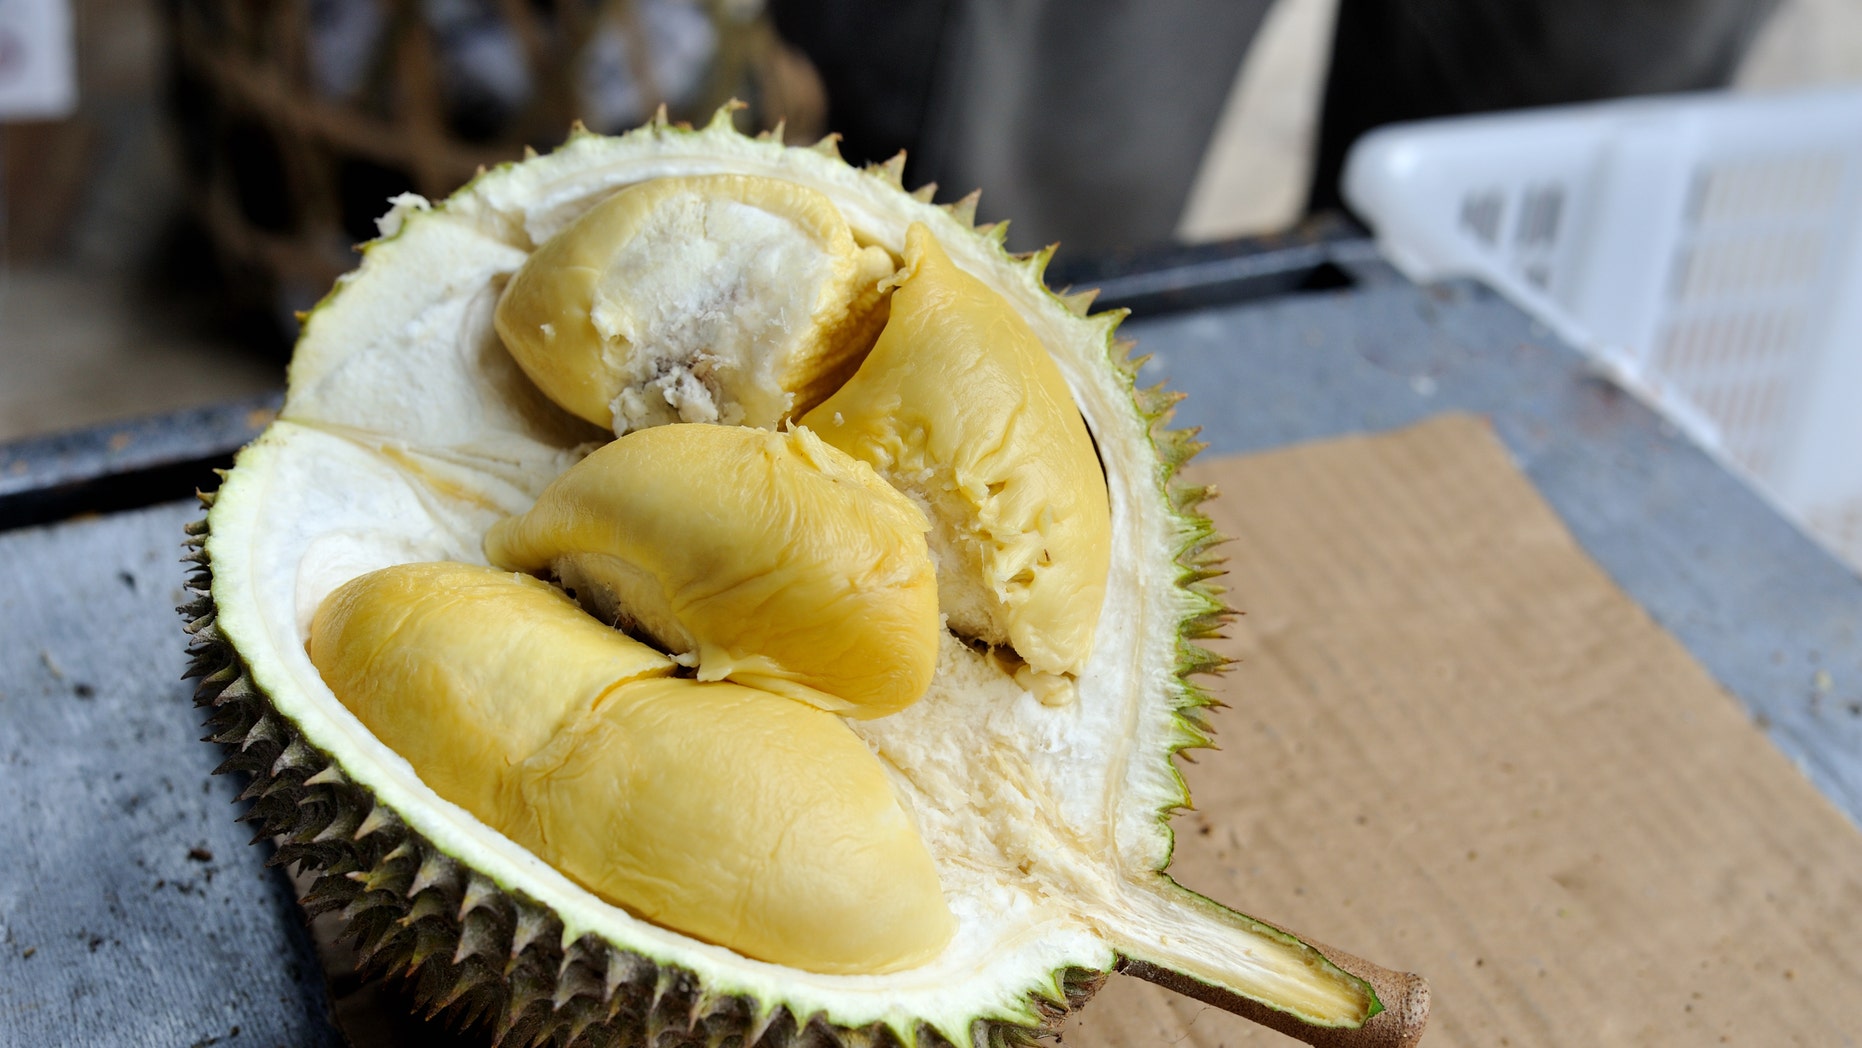 A durian expedition, sometimes designated by the 